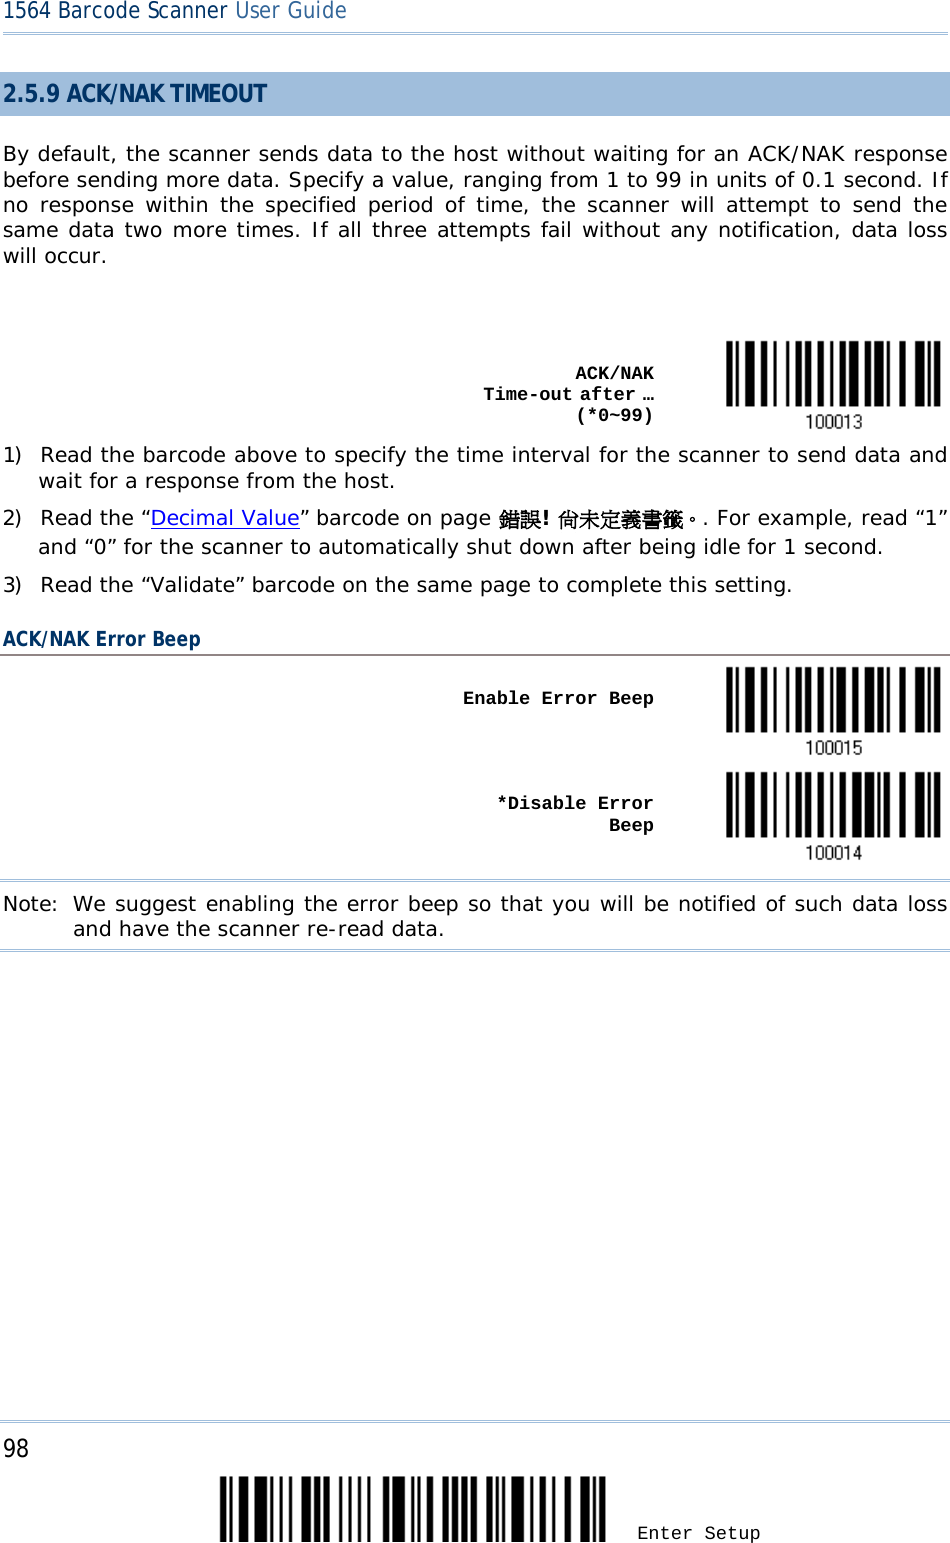 98 Enter Setup 1564 Barcode Scanner User Guide  2.5.9 ACK/NAK TIMEOUT By default, the scanner sends data to the host without waiting for an ACK/NAK response before sending more data. Specify a value, ranging from 1 to 99 in units of 0.1 second. If no response within the specified period of time, the scanner will attempt to send the same data two more times. If all three attempts fail without any notification, data loss will occur.     ACK/NAK Time-out after … (*0~99)  1) Read the barcode above to specify the time interval for the scanner to send data and wait for a response from the host.       2) Read the “Decimal Value” barcode on page 錯誤! 尚未定義書籤。. For example, read “1” and “0” for the scanner to automatically shut down after being idle for 1 second.  3) Read the “Validate” barcode on the same page to complete this setting. ACK/NAK Error Beep    Enable Error Beep       *Disable Error Beep  Note: We suggest enabling the error beep so that you will be notified of such data loss and have the scanner re-read data.   